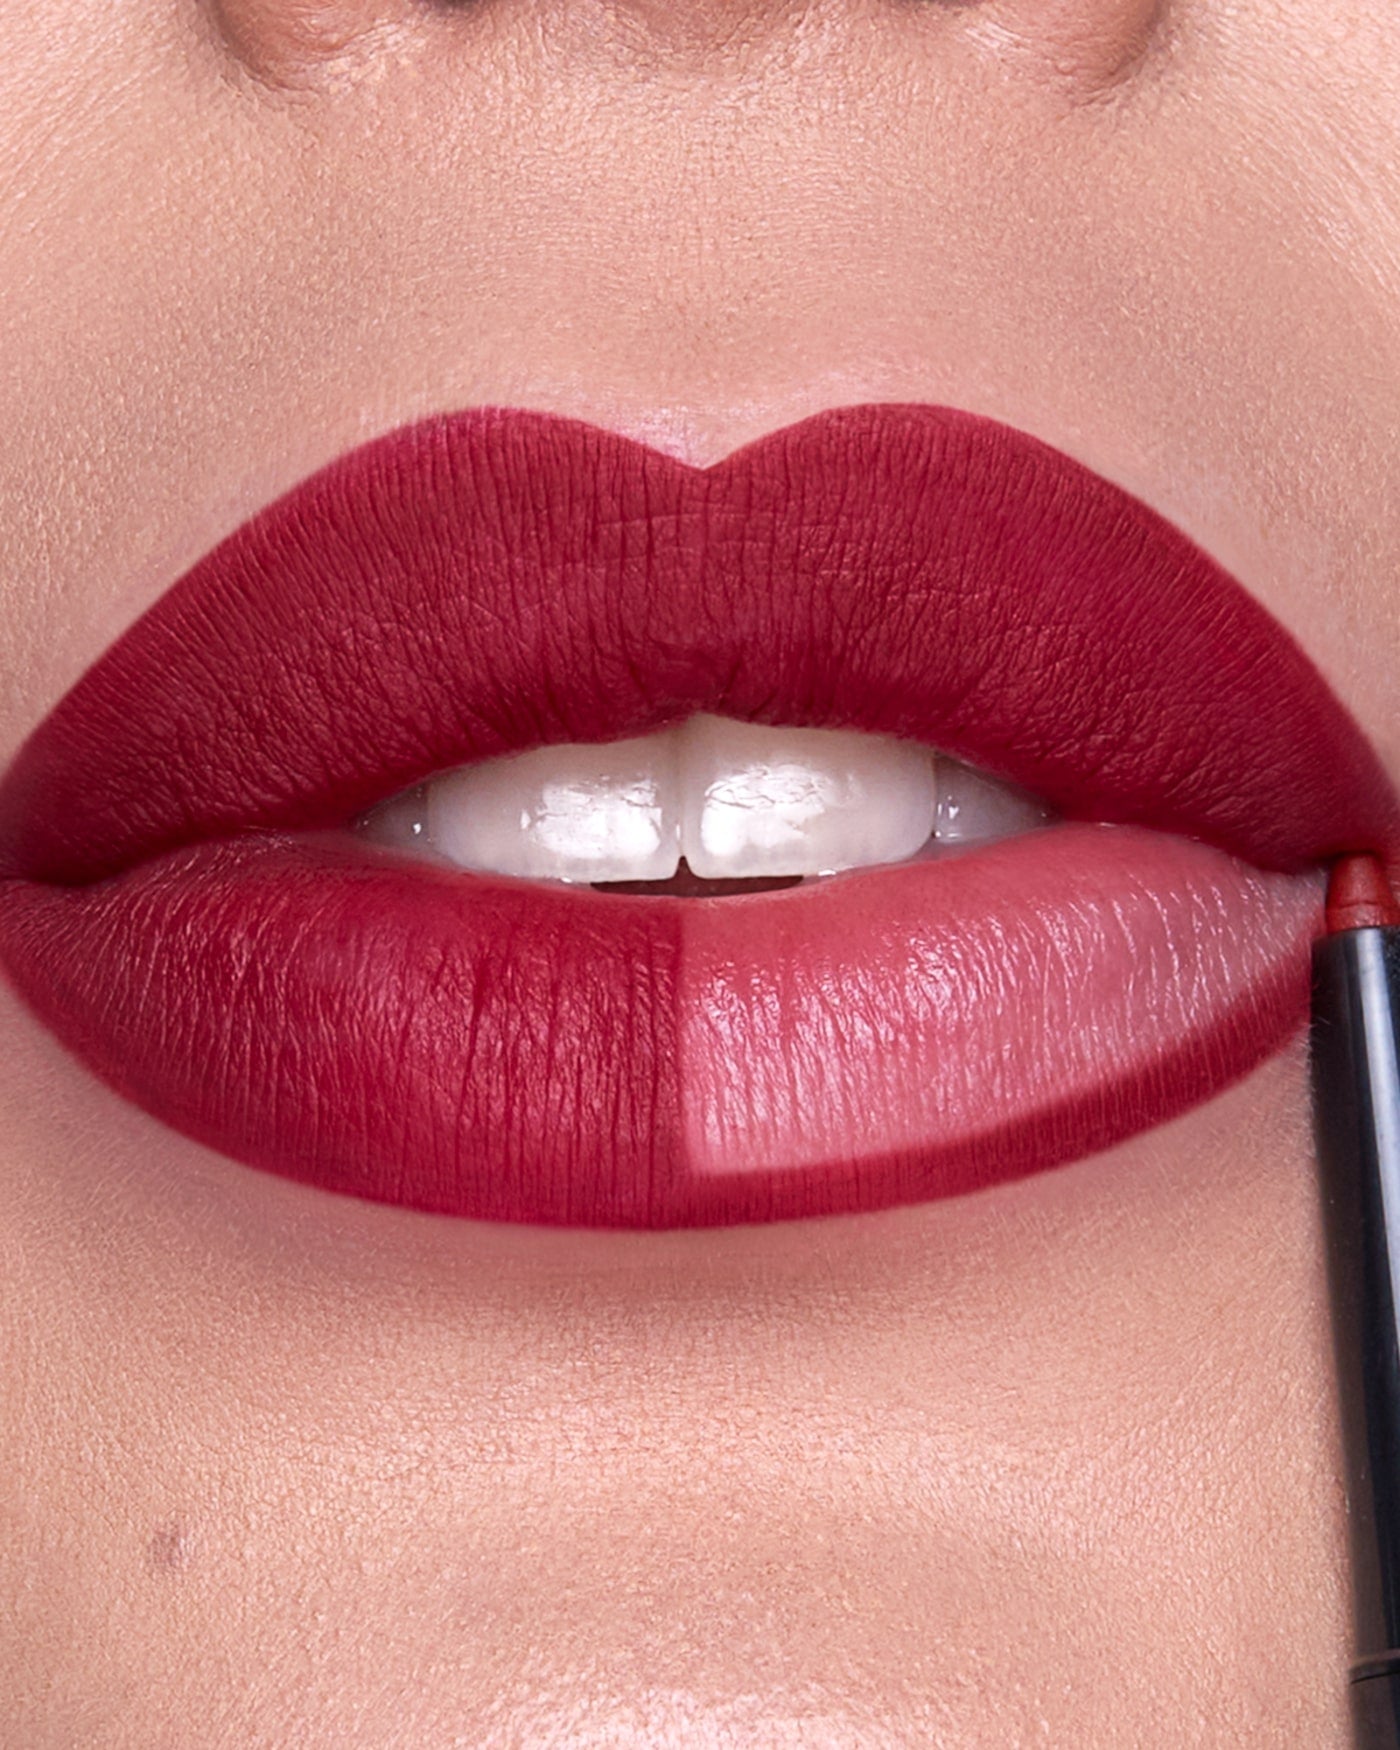 OUTLINE WATERPROOF LIP PENCIL - 06 - Endless Cherry - Astra Make-Up